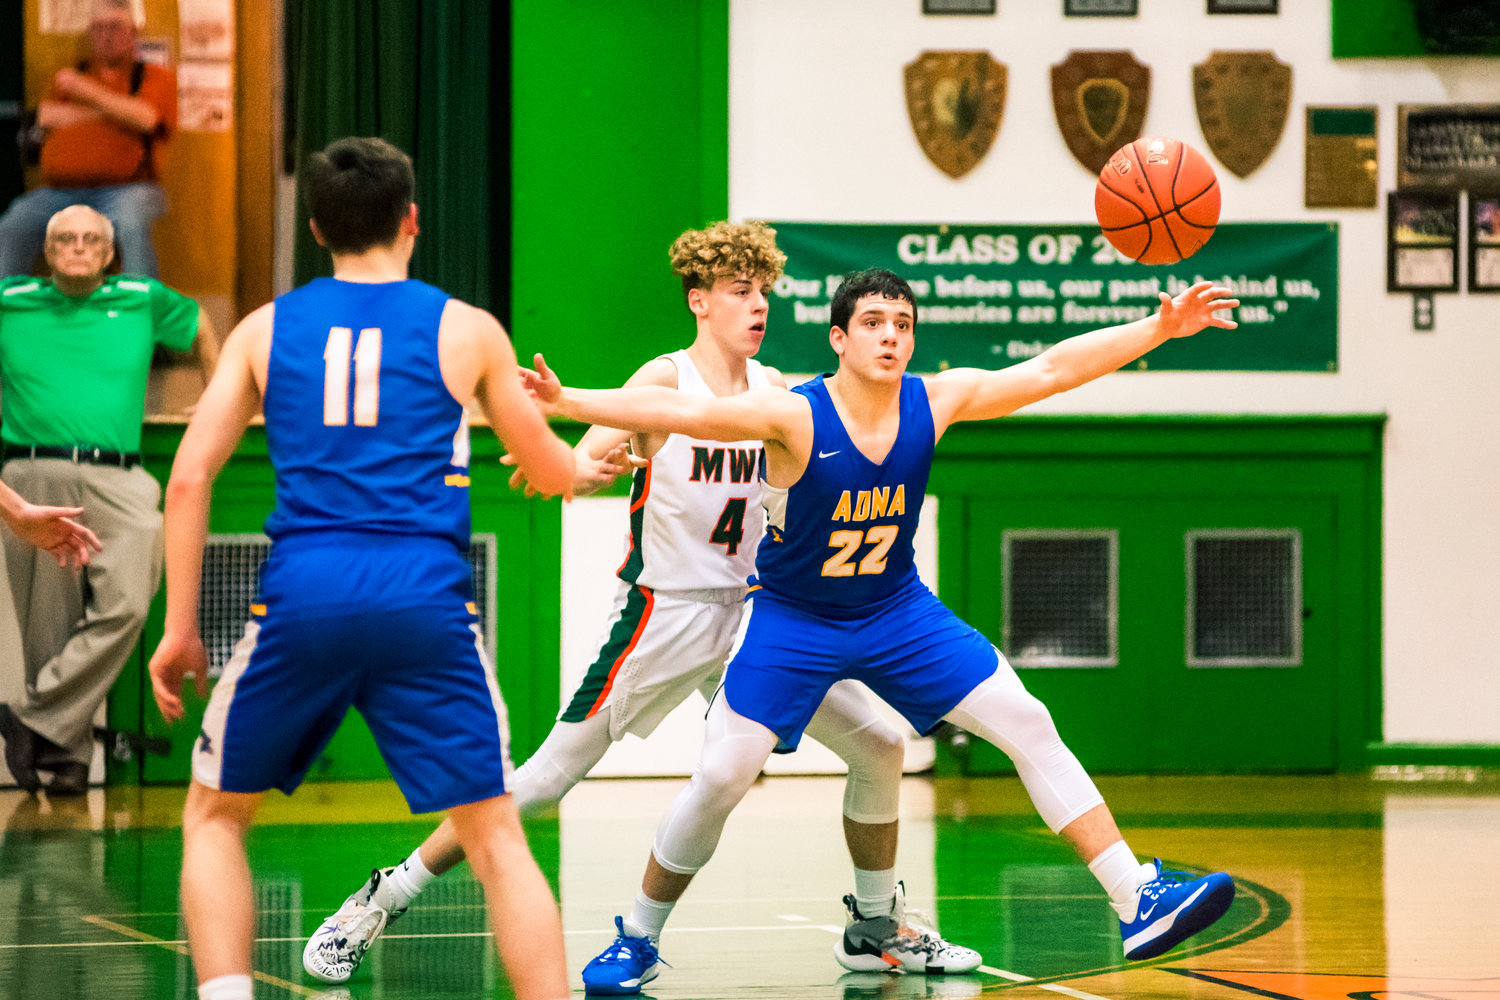 Images from a Central 2B League boys basketball game between Morton White-Pass and Adna played Friday night in Morton.